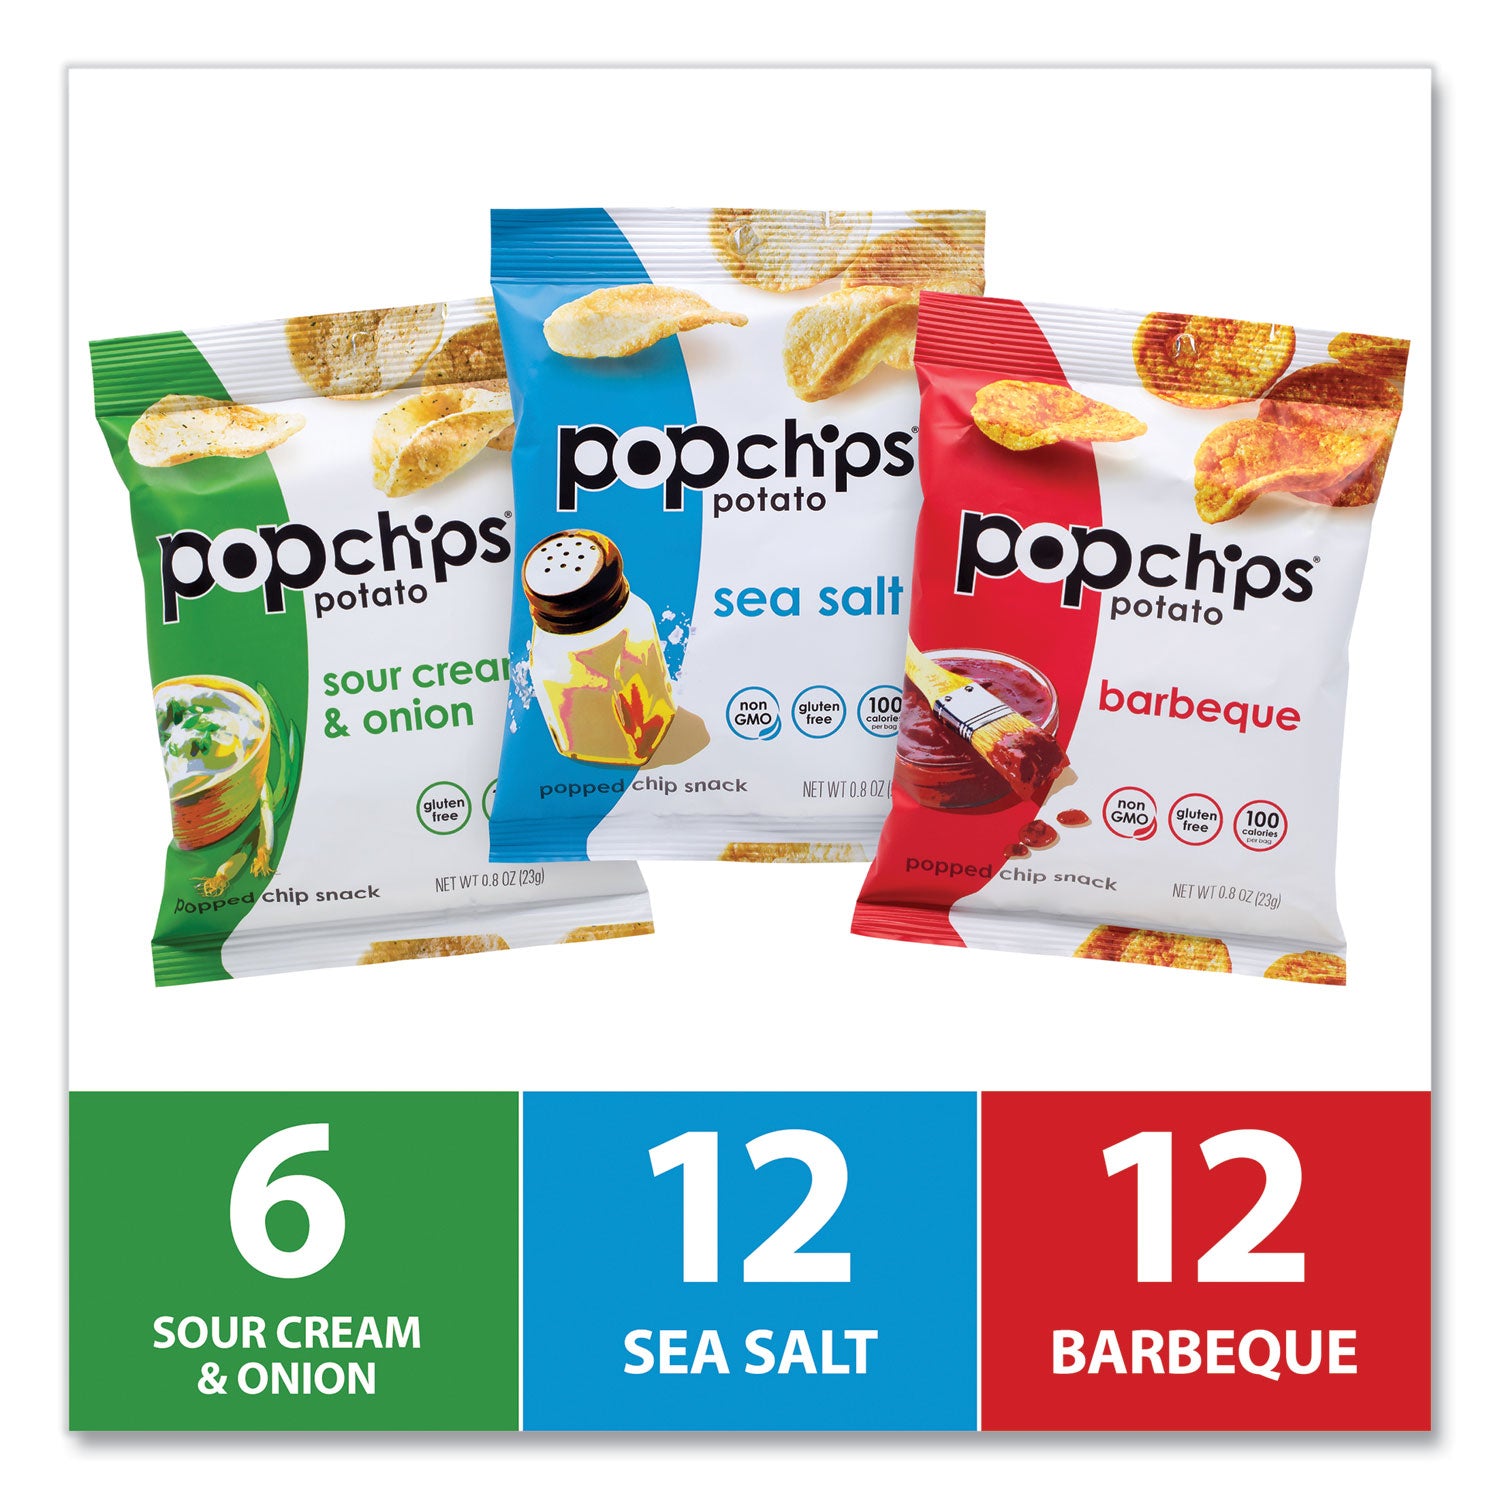 potato-chips-variety-pack-barbeque-sea-salt-sour-cream-and-onion-08-oz-bag-30-pack-ships-in-1-3-business-days_grr22001998 - 5